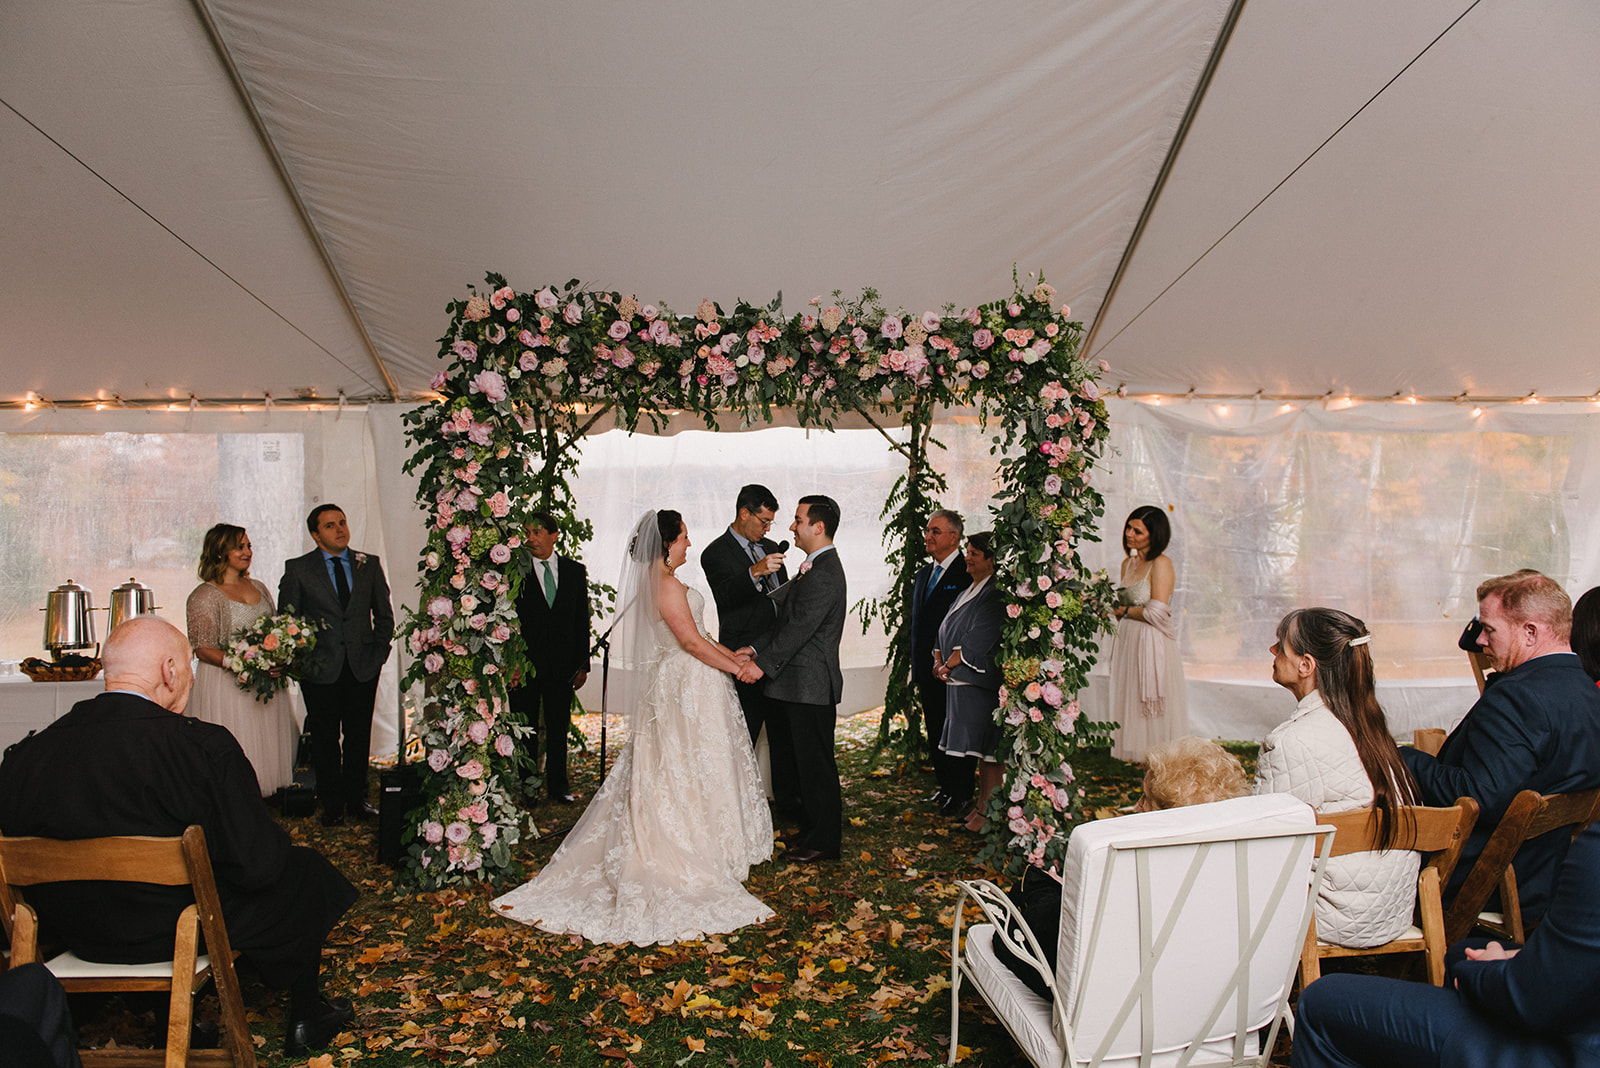 Rainy day wedding at a Private Estate in Germantown